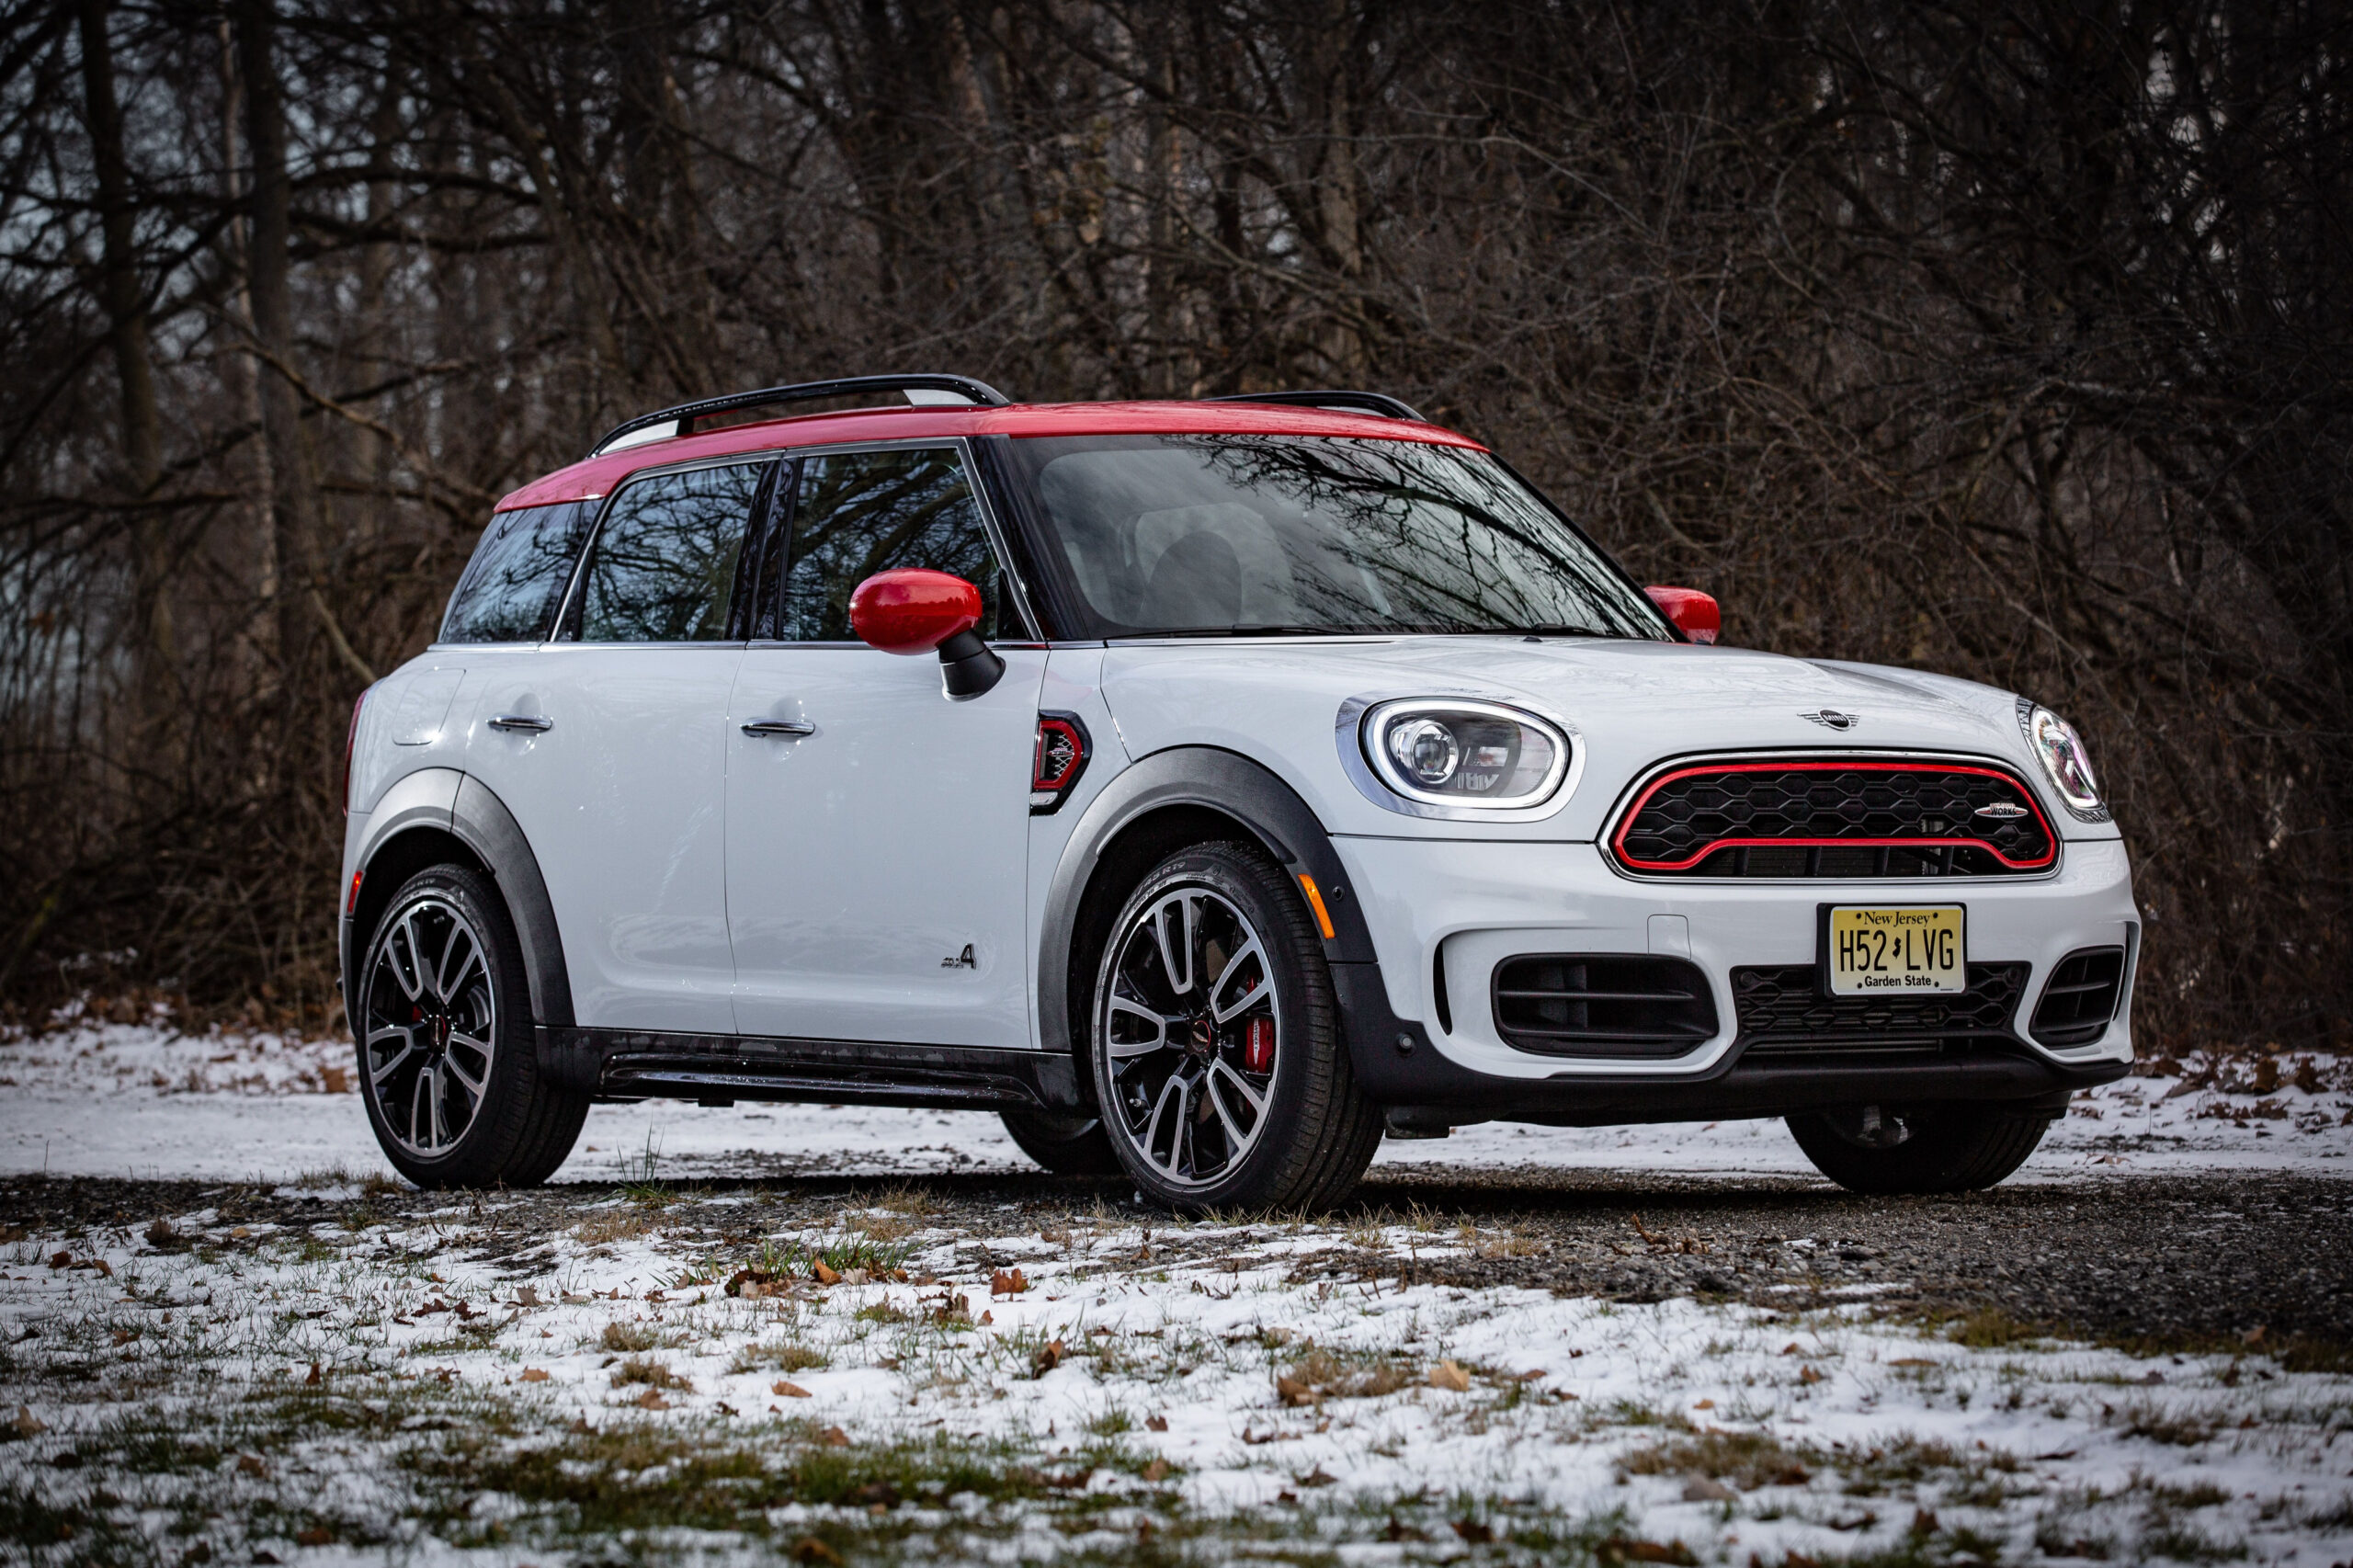 5 Mini Cooper Countryman JCW Review, Pricing, and Specs - mini cooper countryman prices